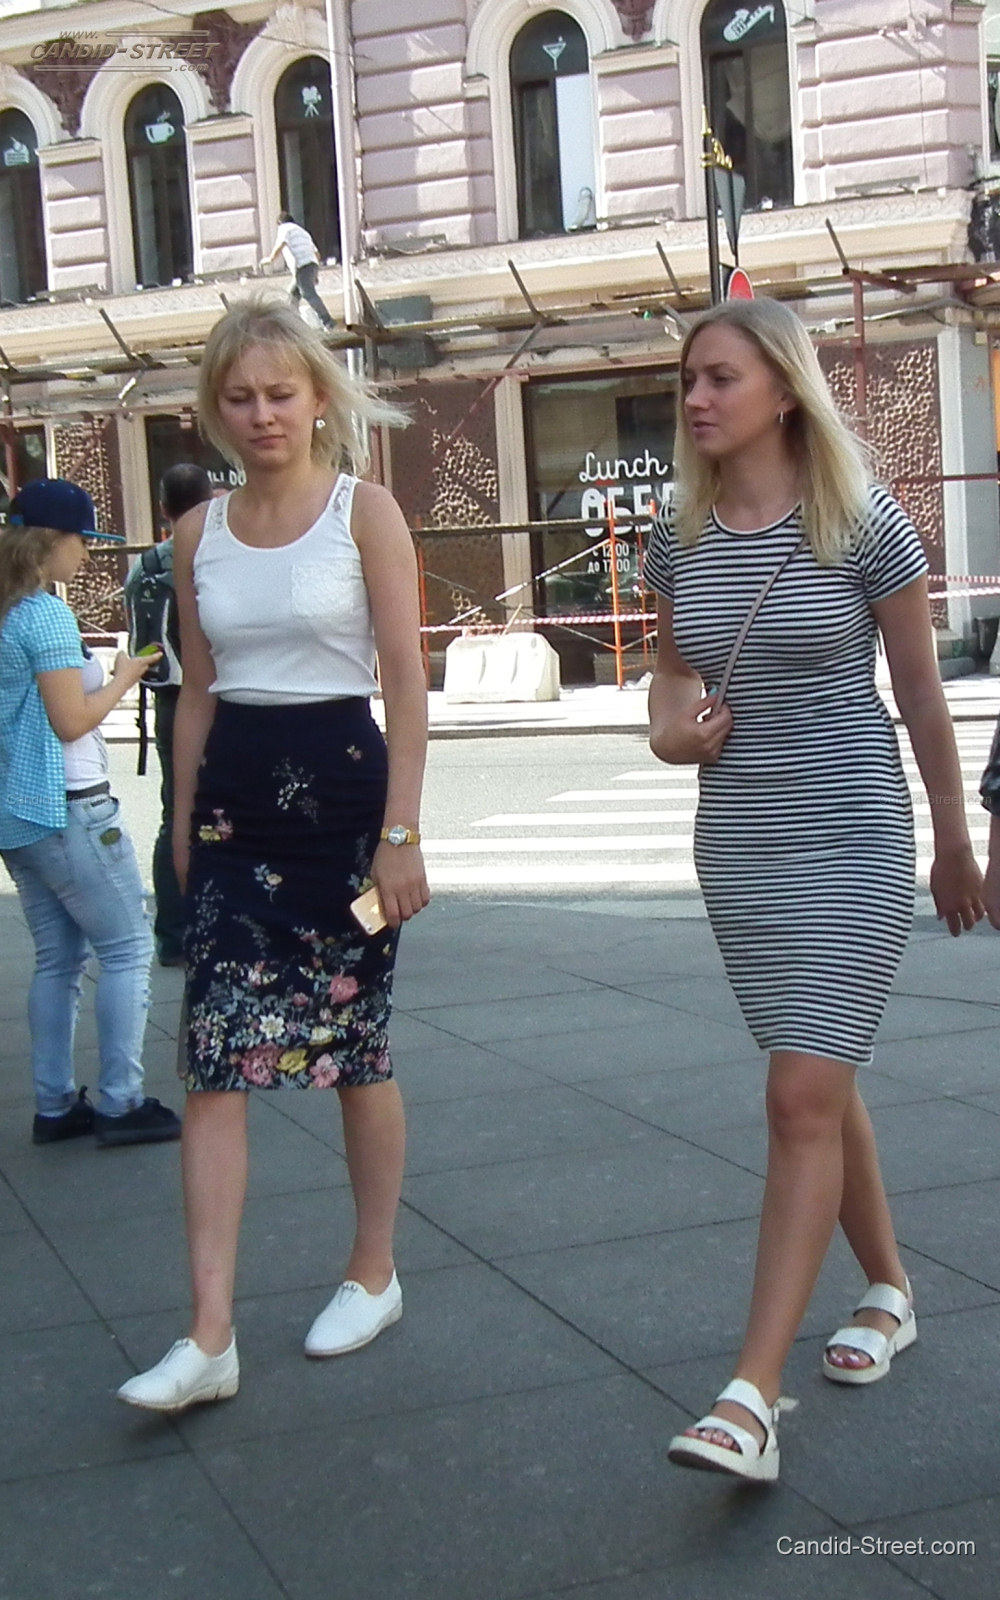 Exciting candid milfs on the streets - 01-dscf0027 from Candid Street